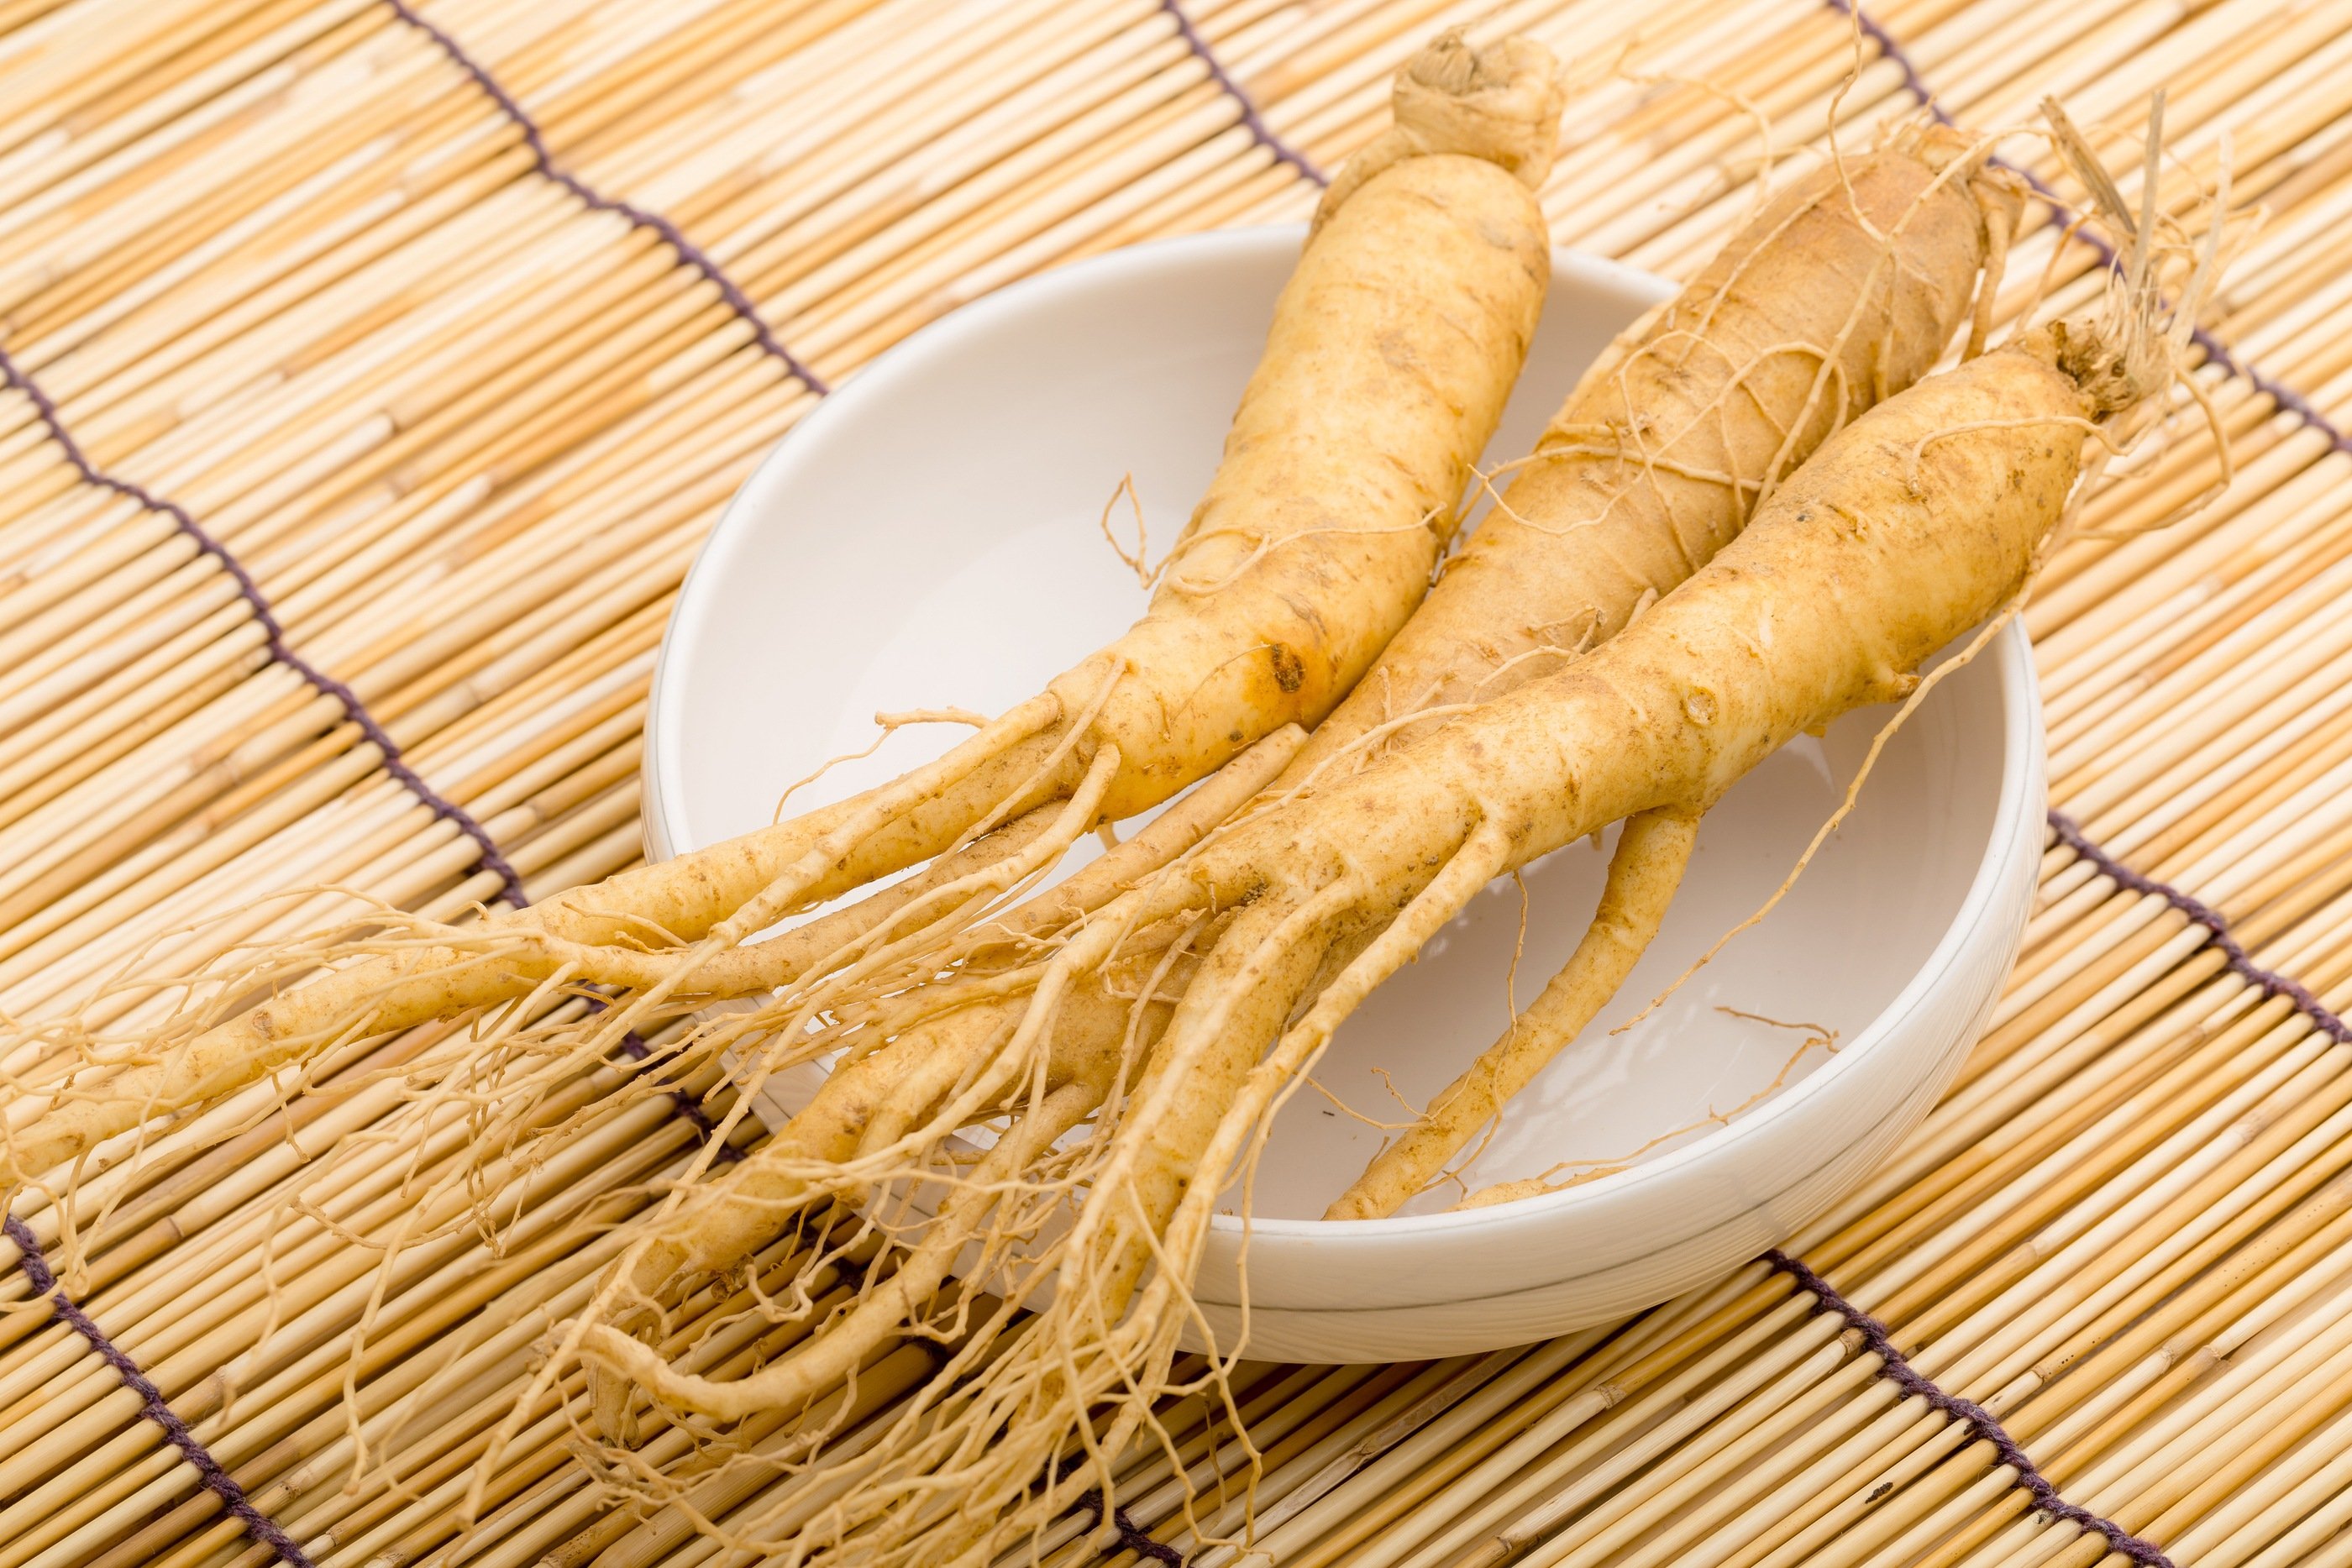 10 Benefits Of Ginseng That You Need To Know